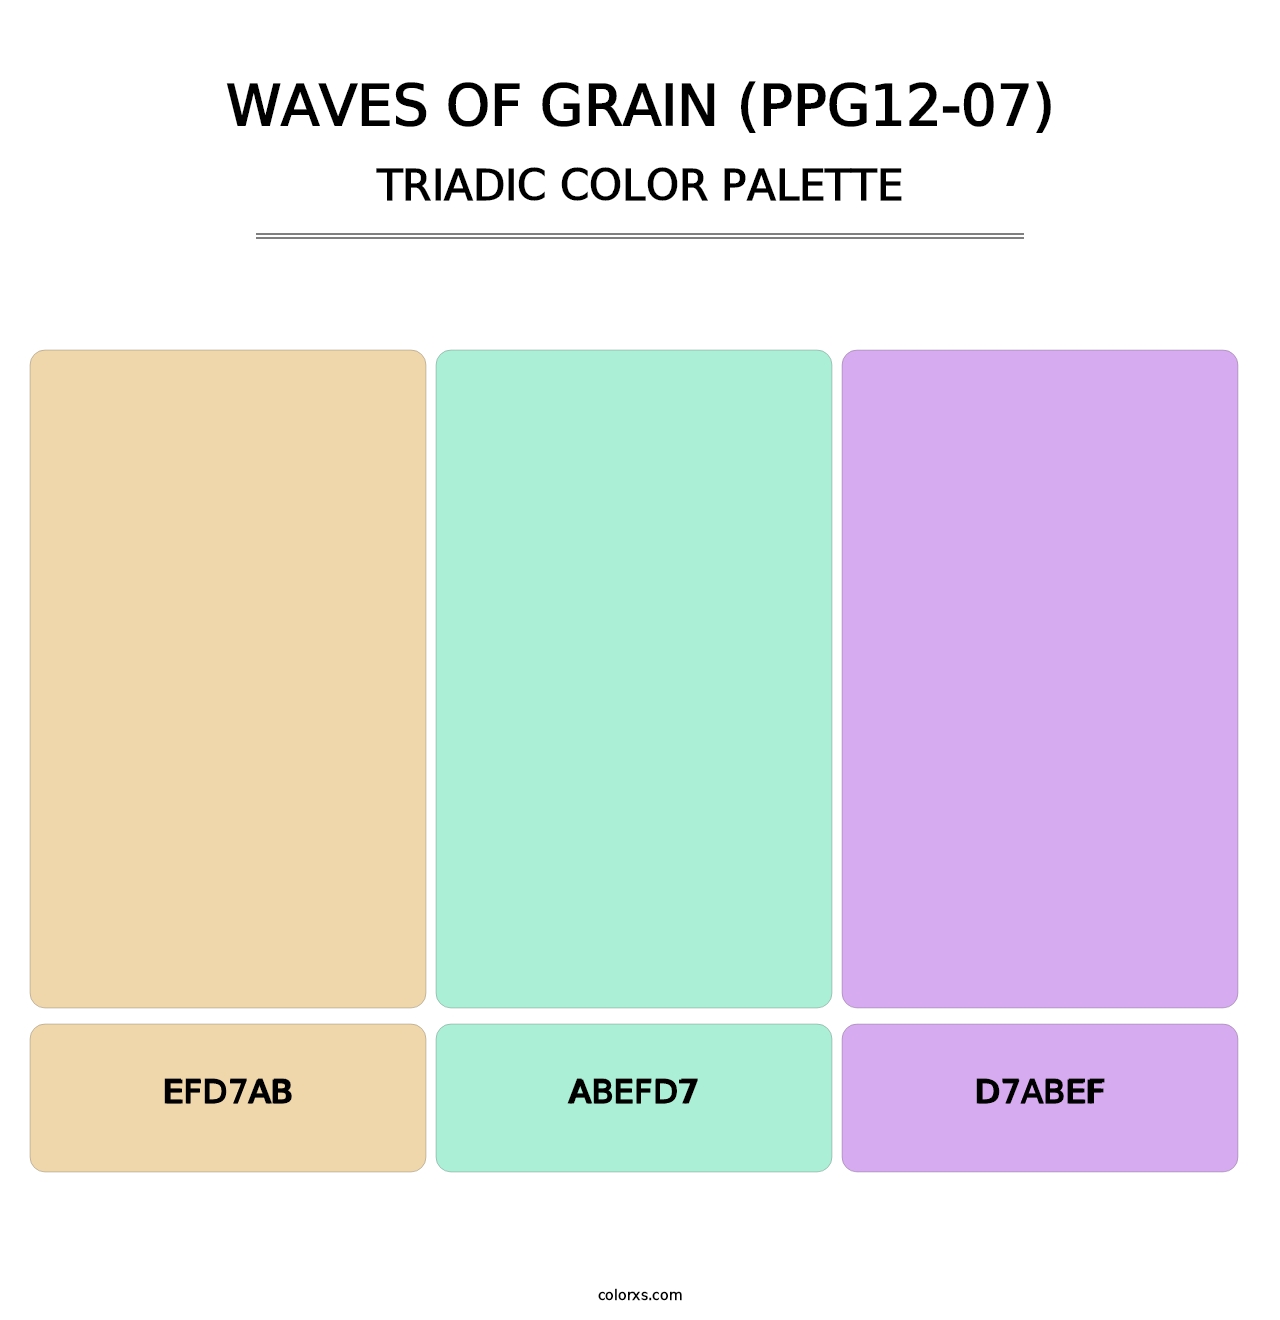 Waves Of Grain (PPG12-07) - Triadic Color Palette